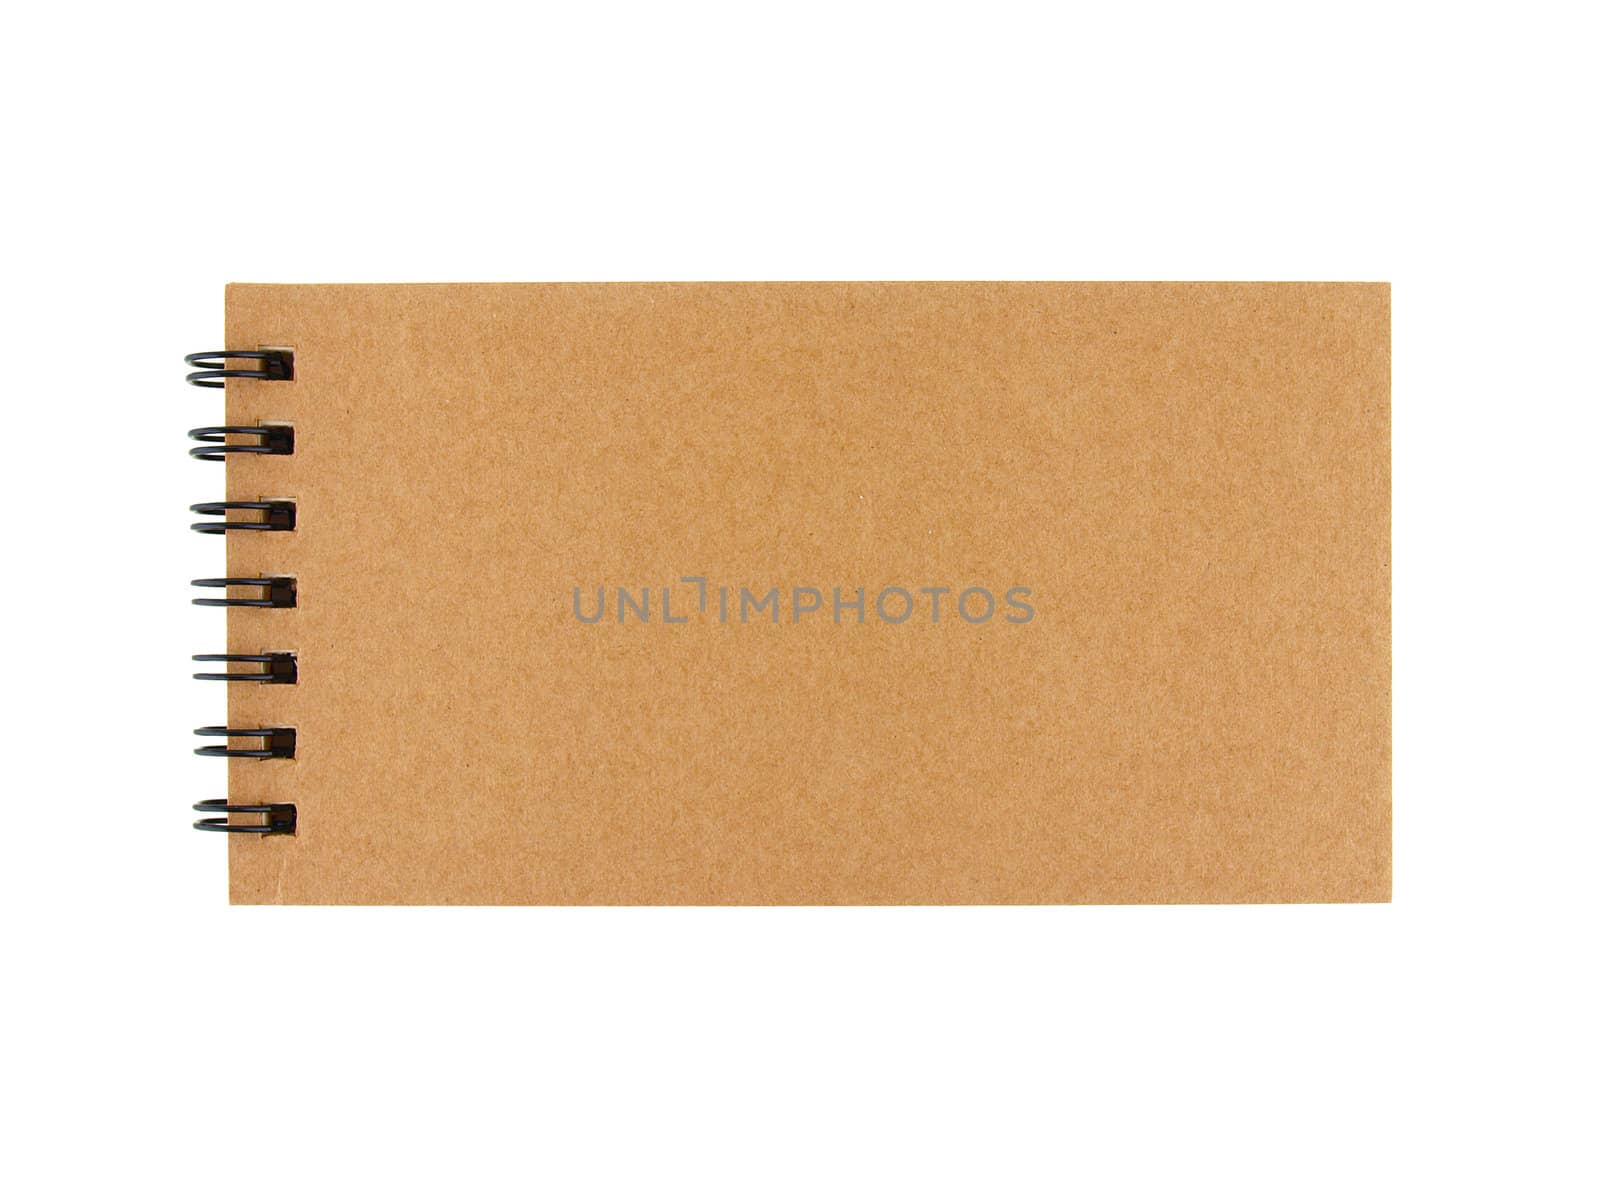 Isolated pencil with notebook on white background